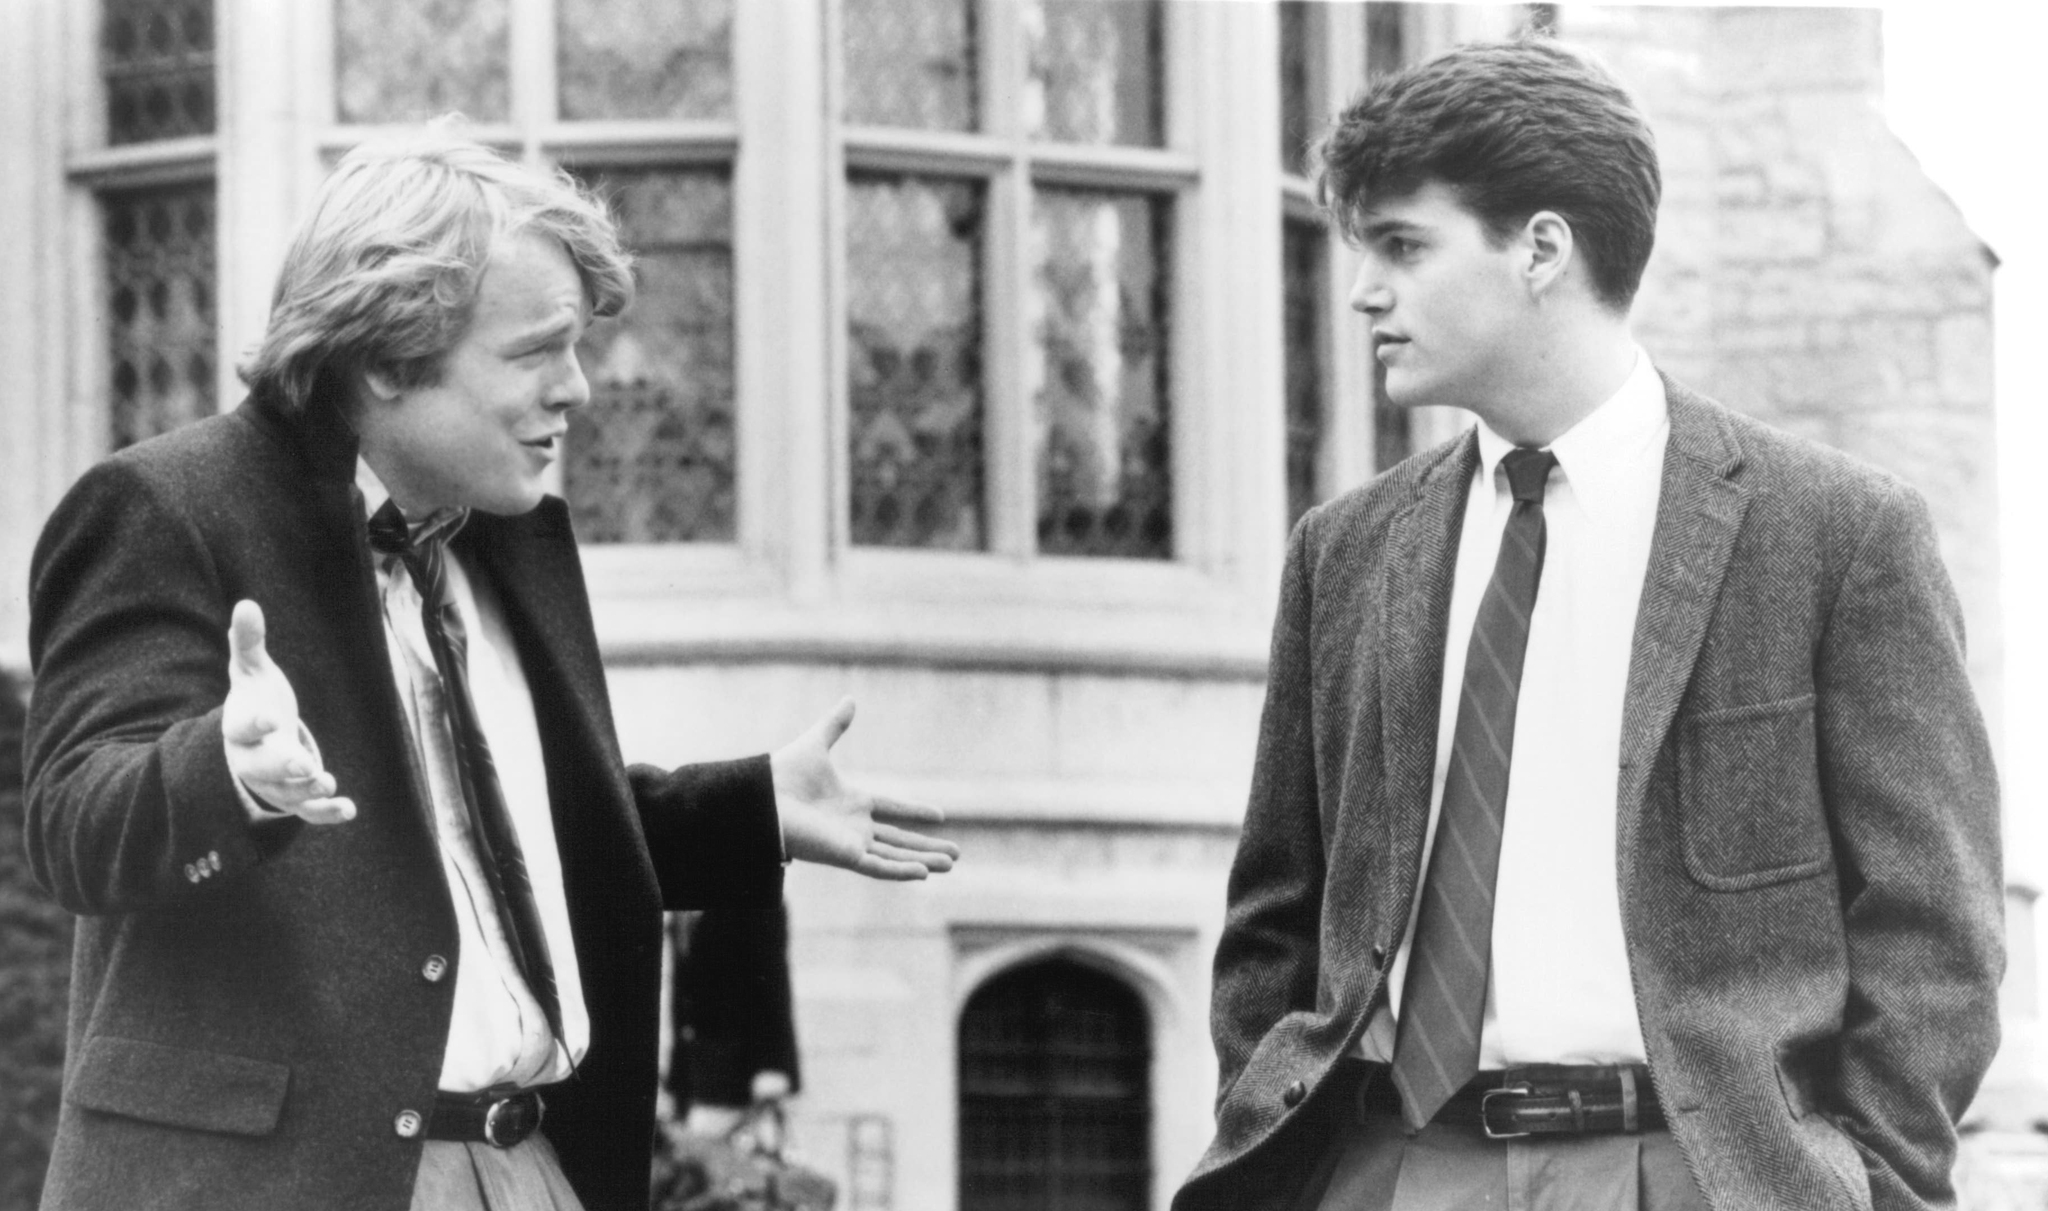 Still of Philip Seymour Hoffman and Chris O'Donnell in Scent of a Woman (1992)